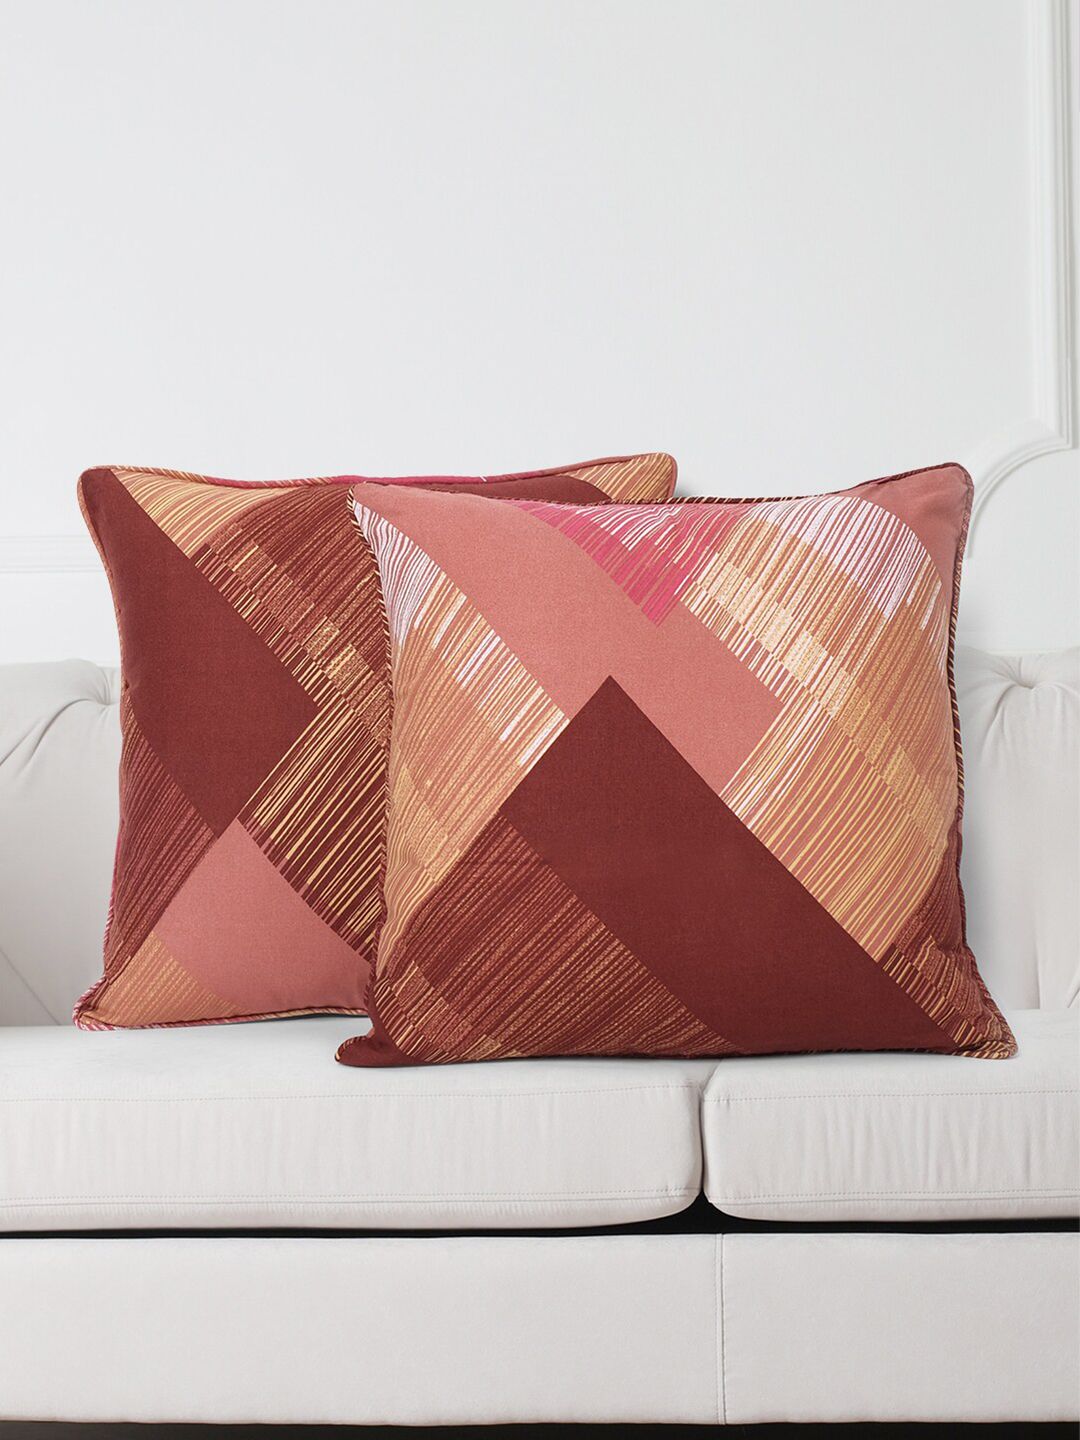 SWAYAM Brown & Peach-Coloured Set of 2 Geometric Square Cushion Covers Price in India